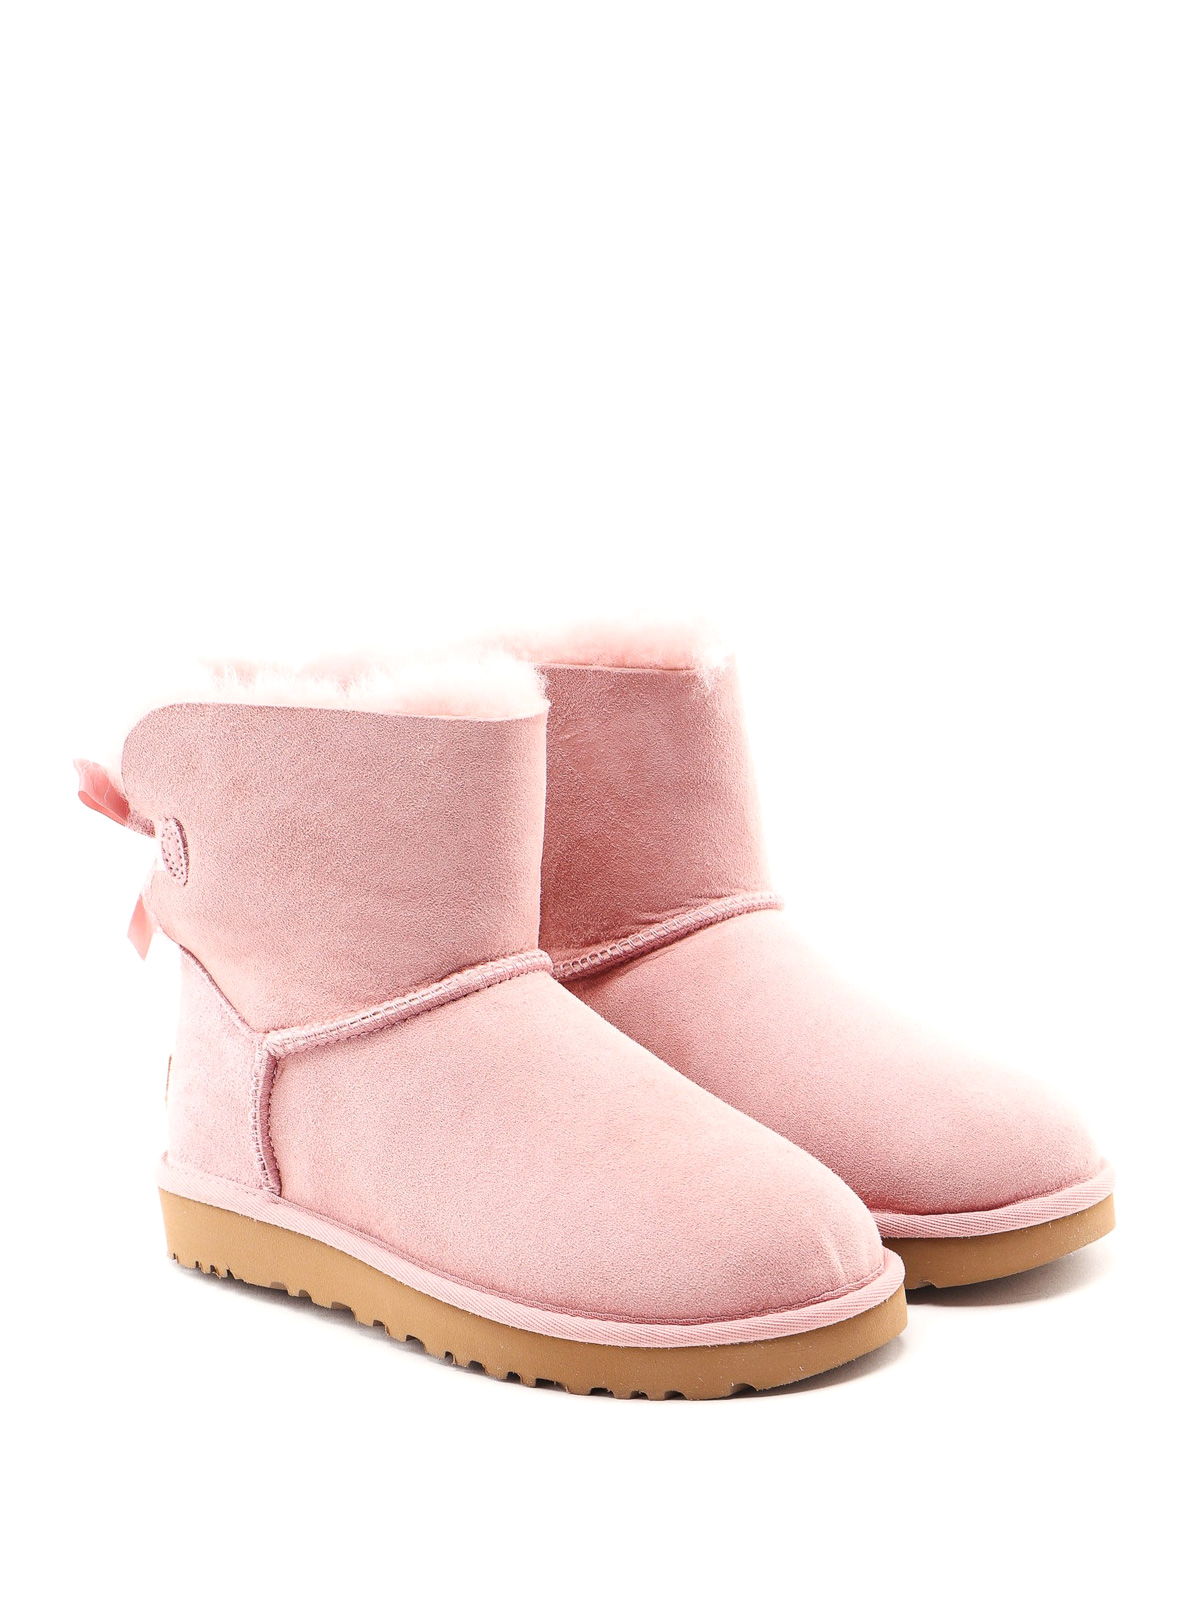 pink ugg bow boots